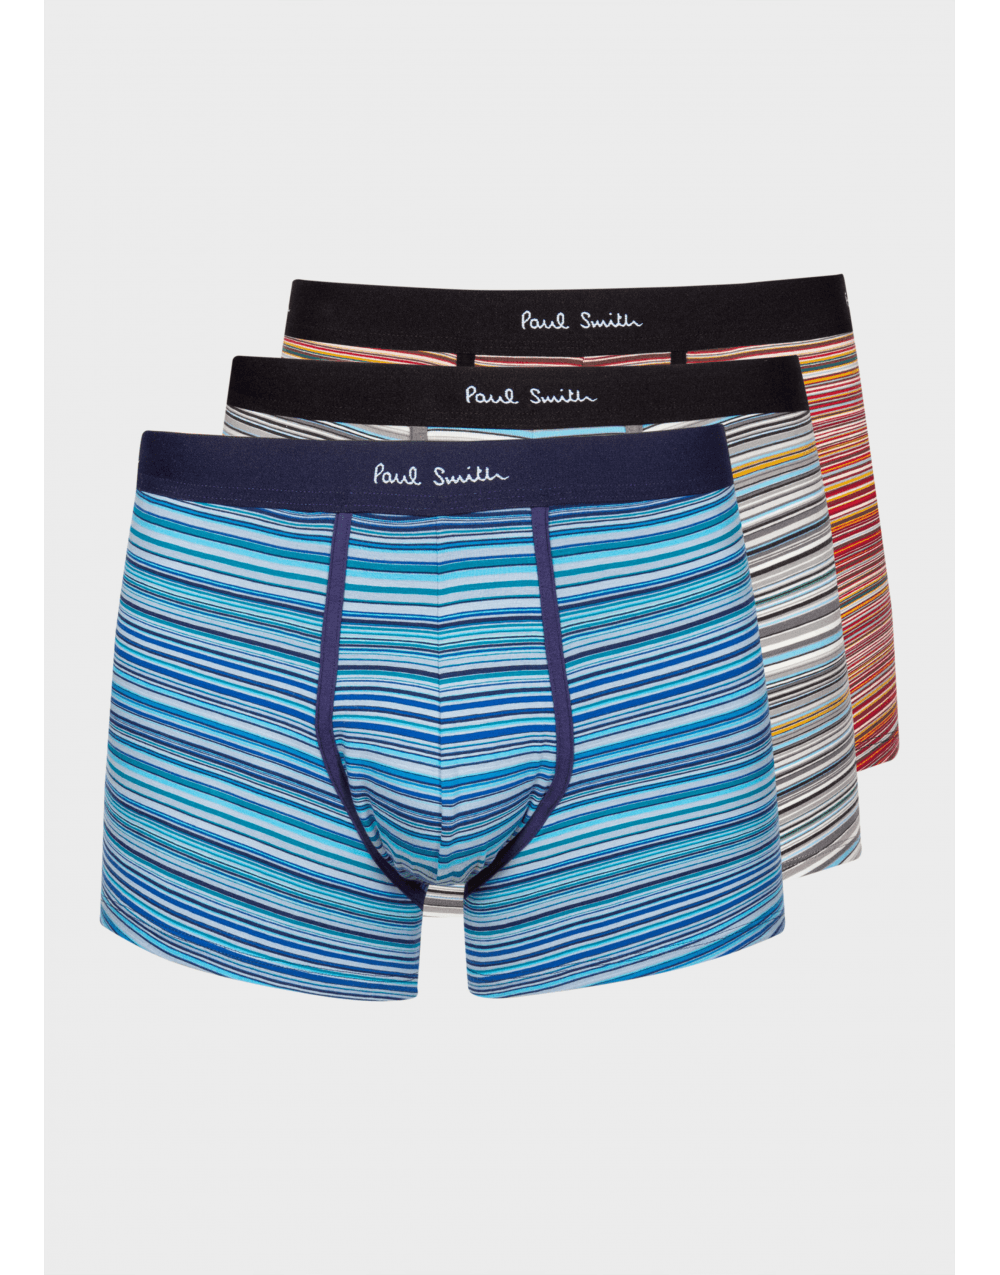 Paul Smith Paul Smith 3 Pack Underwear Col: Grey/blue/red All Stripe, Size: Xl